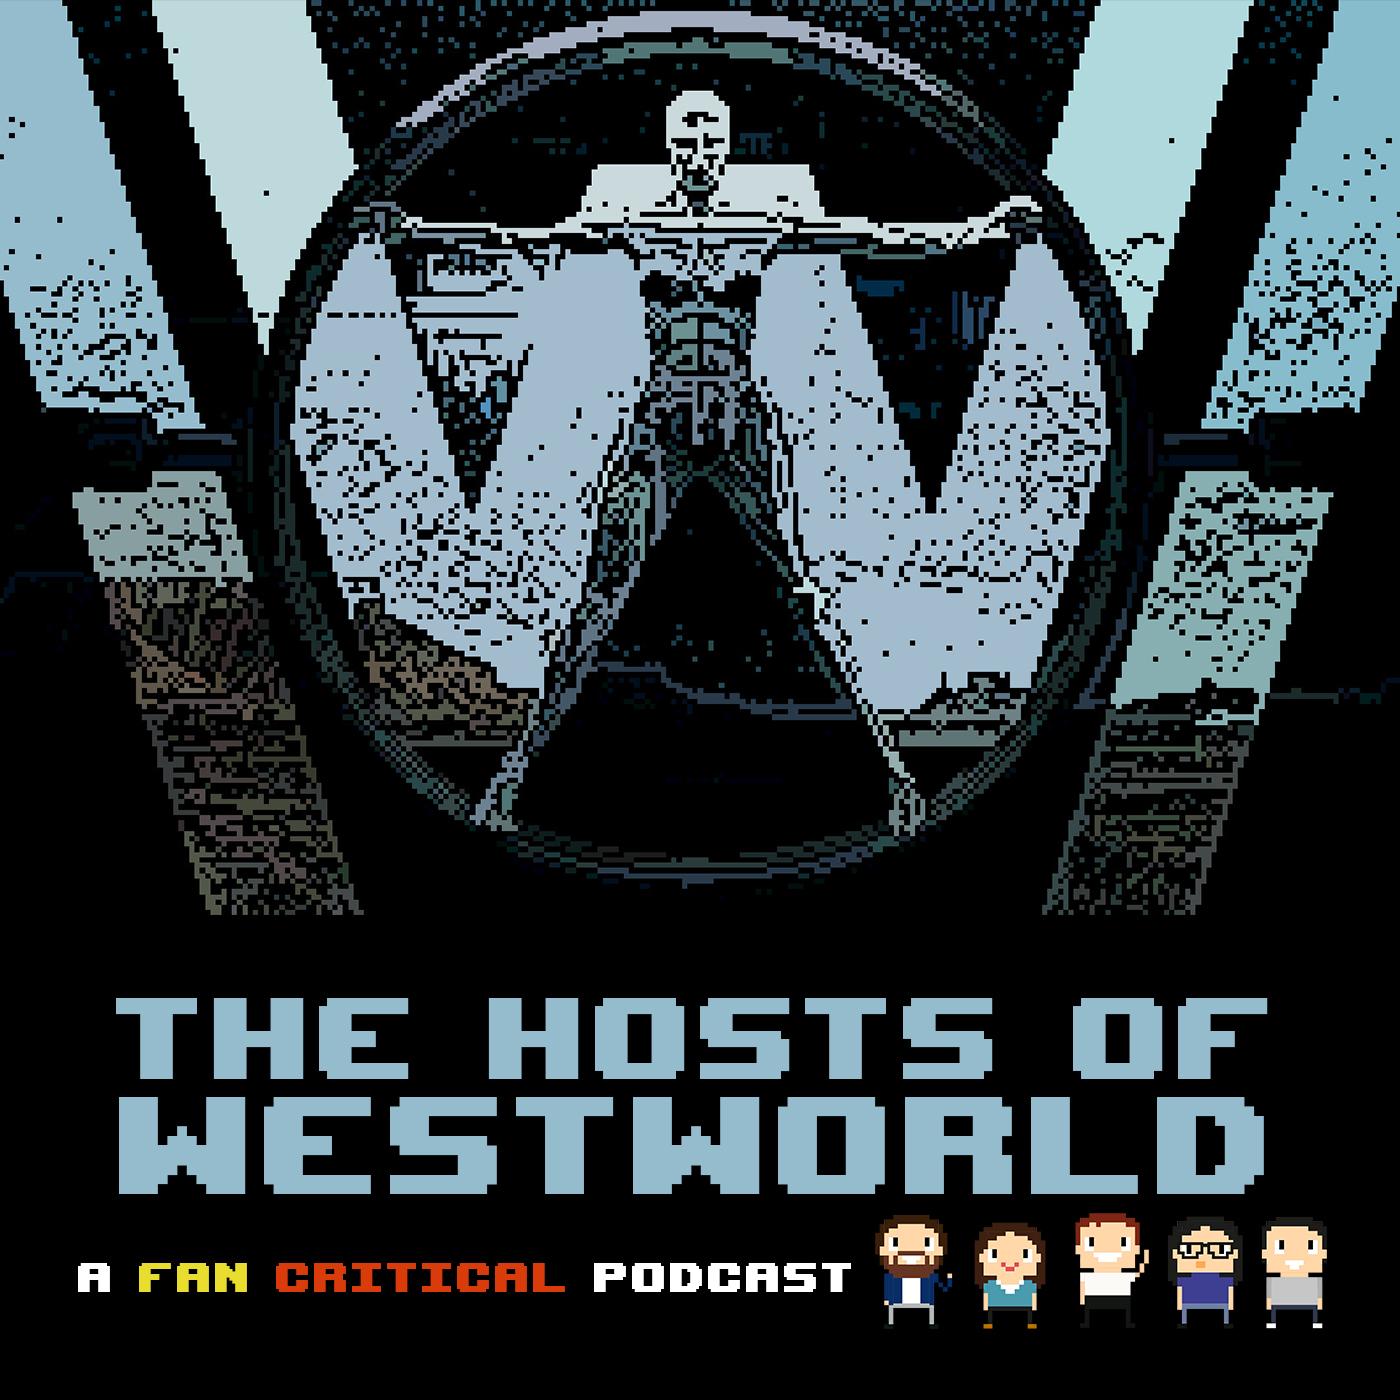 The Hosts Of Westworld: A podcast dedicated to HBO's Westworld